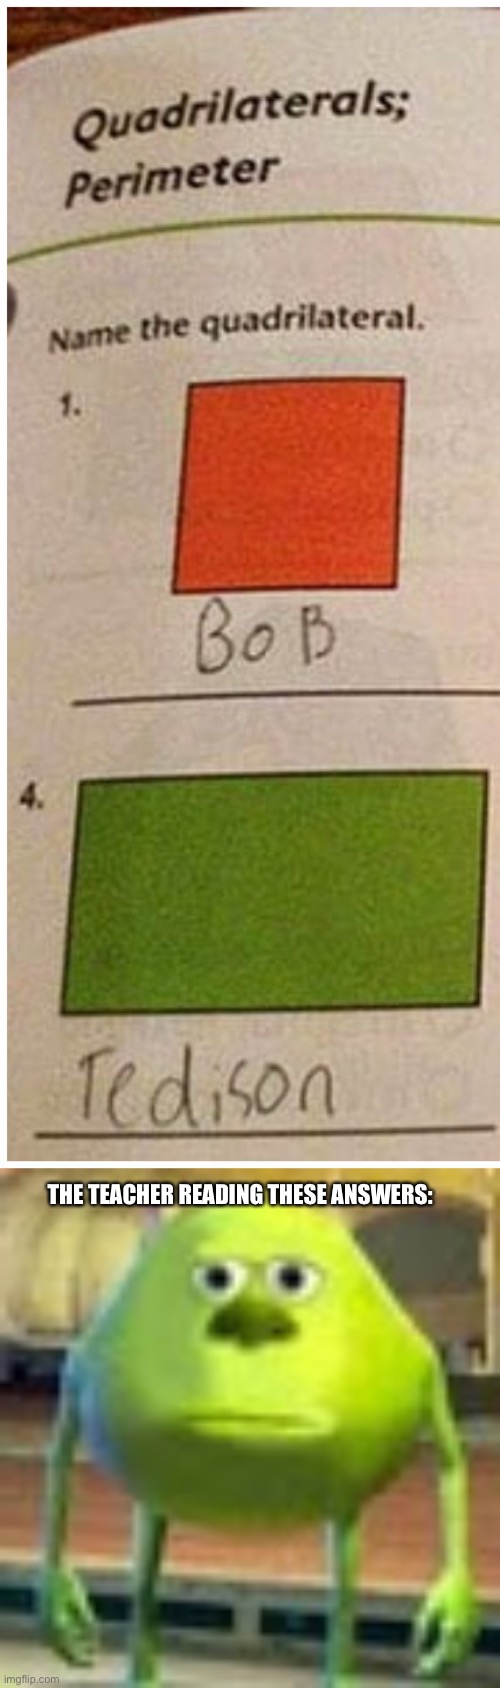 Wonder how the teacher felt |  THE TEACHER READING THESE ANSWERS: | image tagged in sully wazowski,tests,funny,gifs,memes,oh wow are you actually reading these tags | made w/ Imgflip meme maker